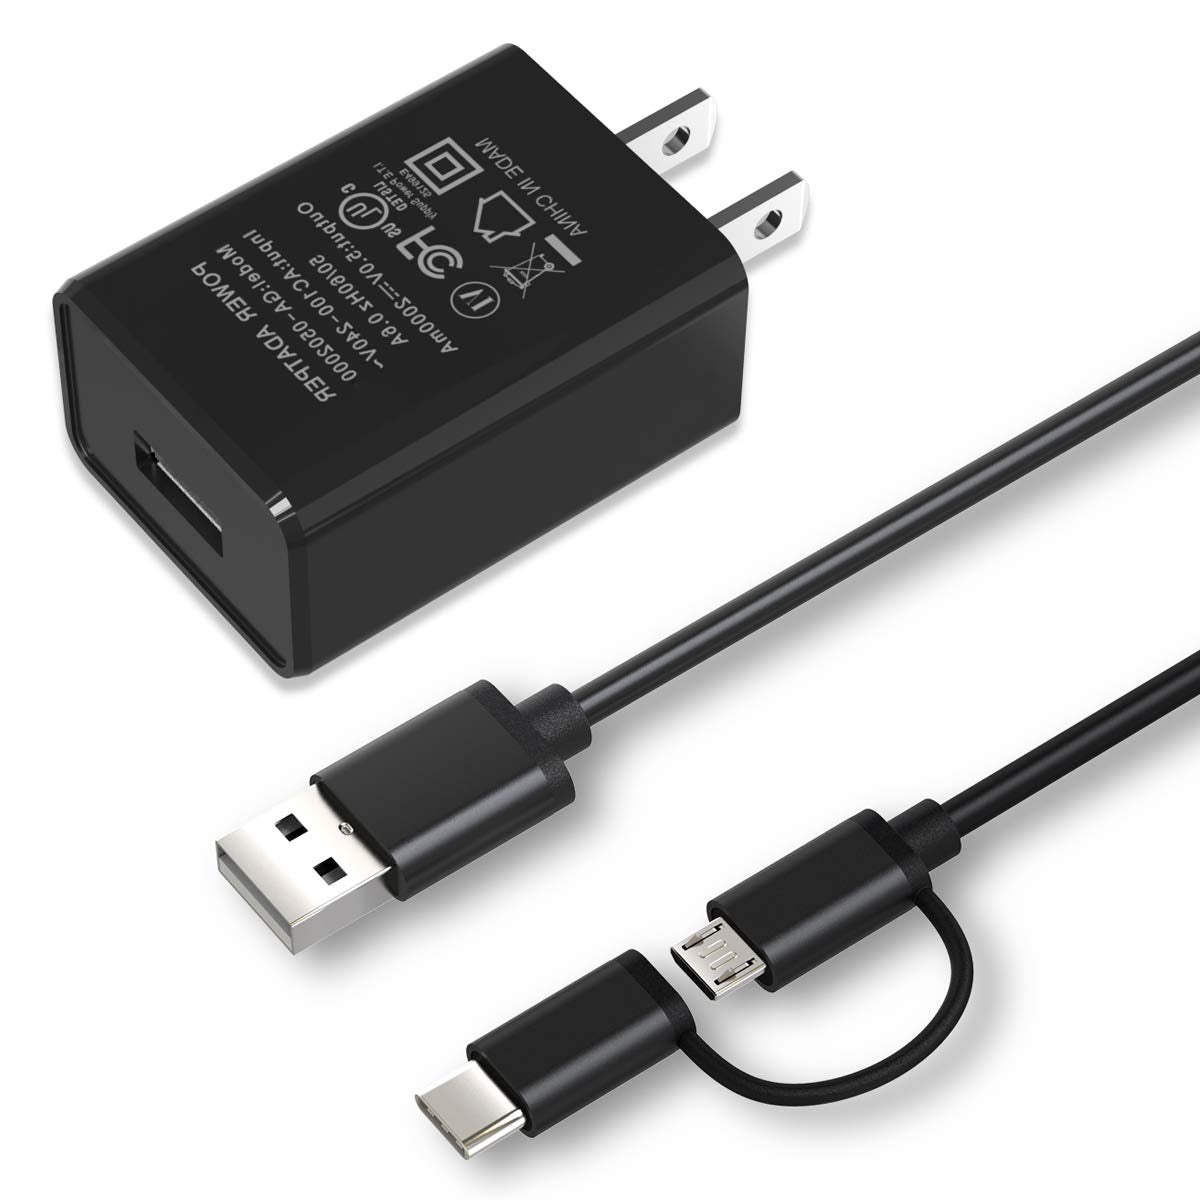 [US Stock] Charger [UL Listed] Compatible for Amazon Kindle Fire HD 10 and more